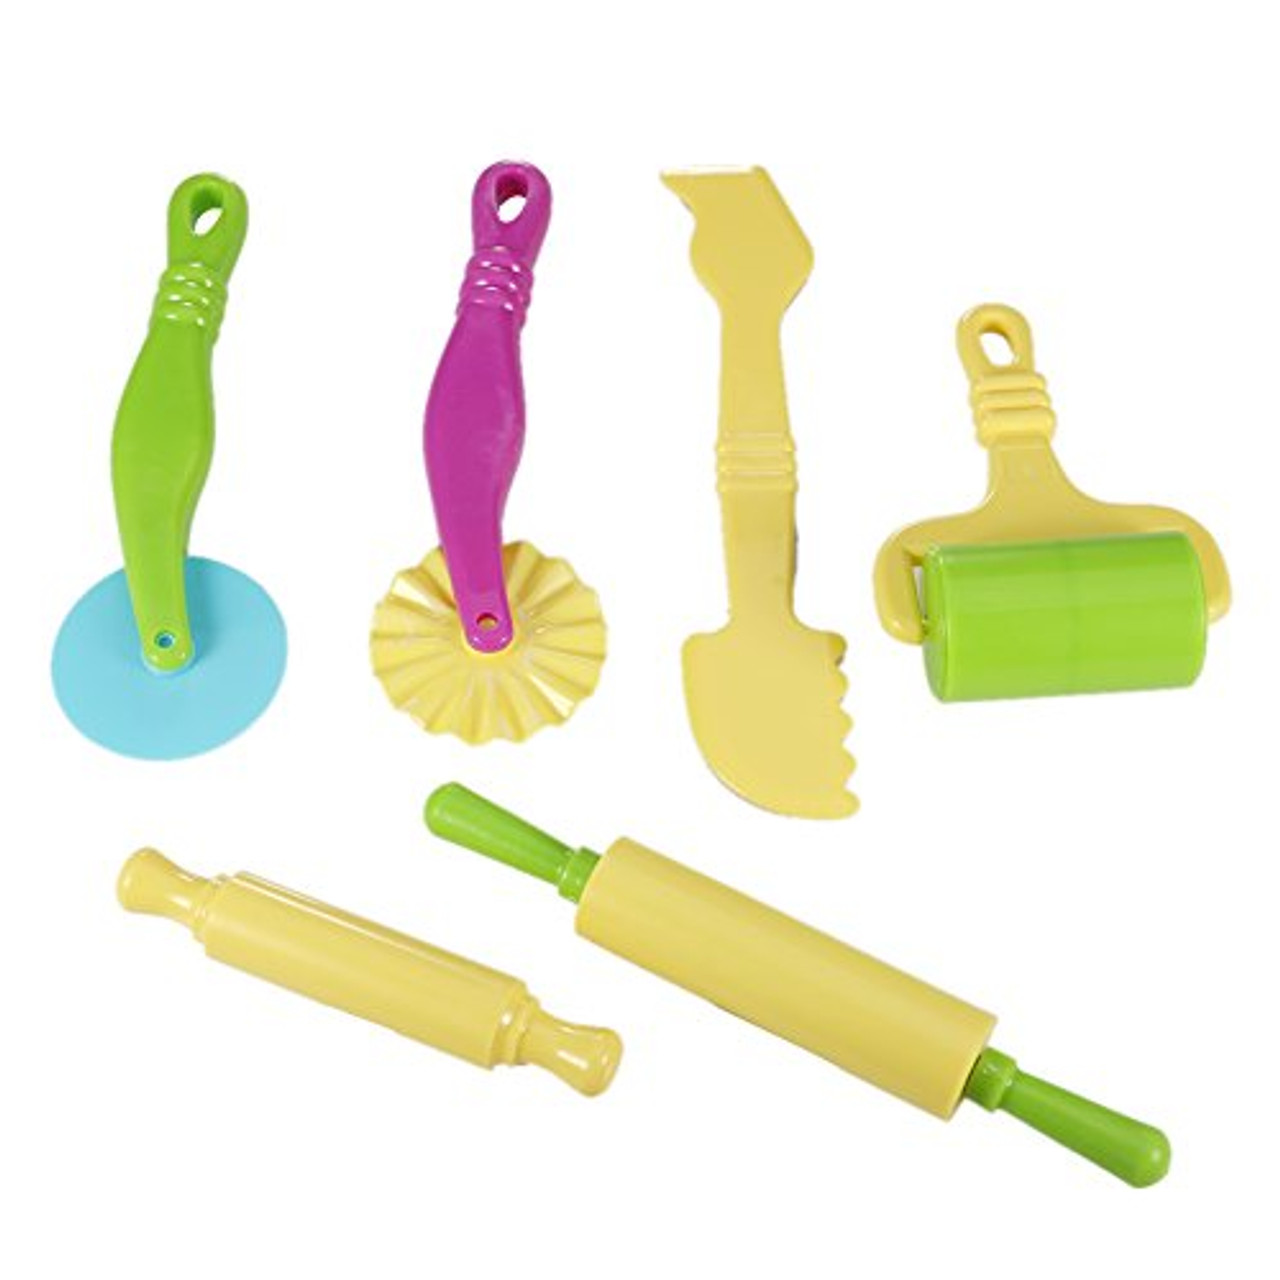 Fashionclubs 6pcs/set Plastic Art Clay and Dough Playing Tools Set for Children Ages 3 and Up